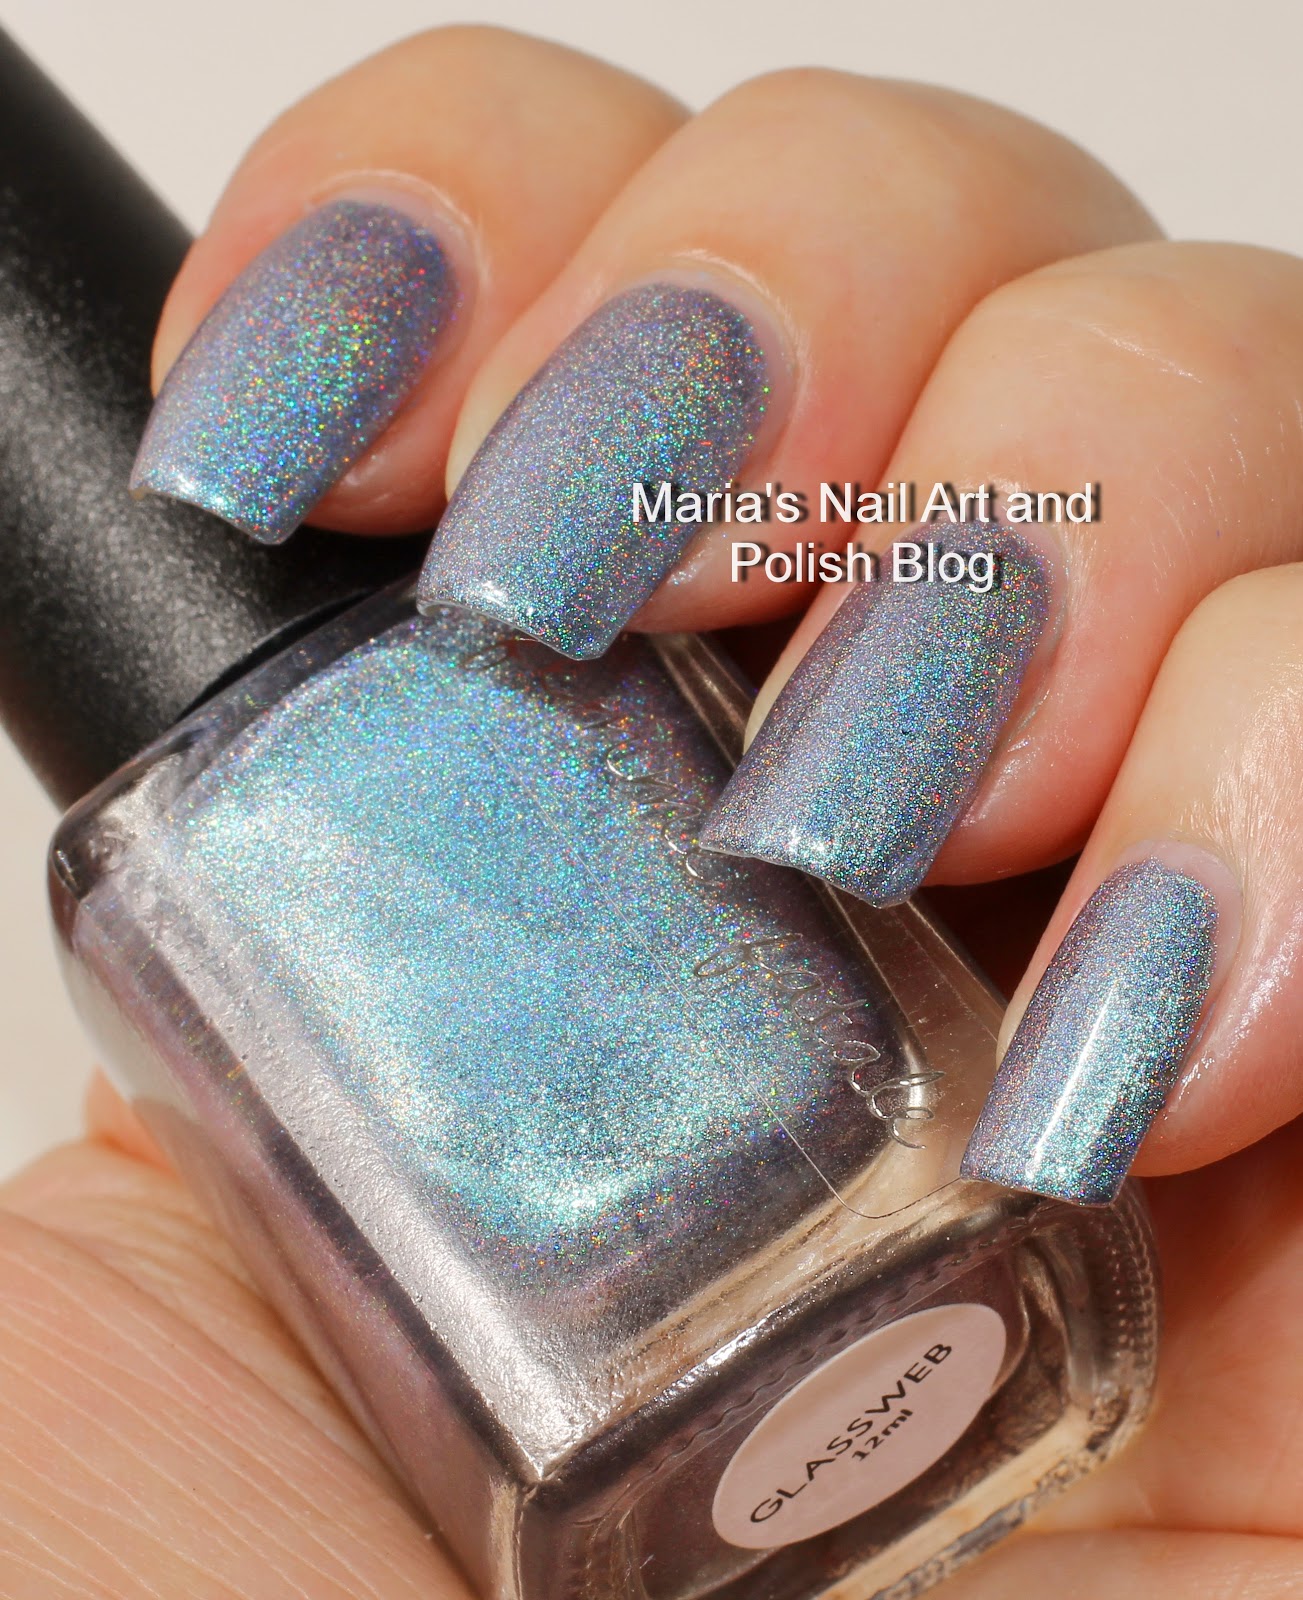 Marias Nail Art and Polish Blog: Femme Fatale Cosmetics Glassweb swatches